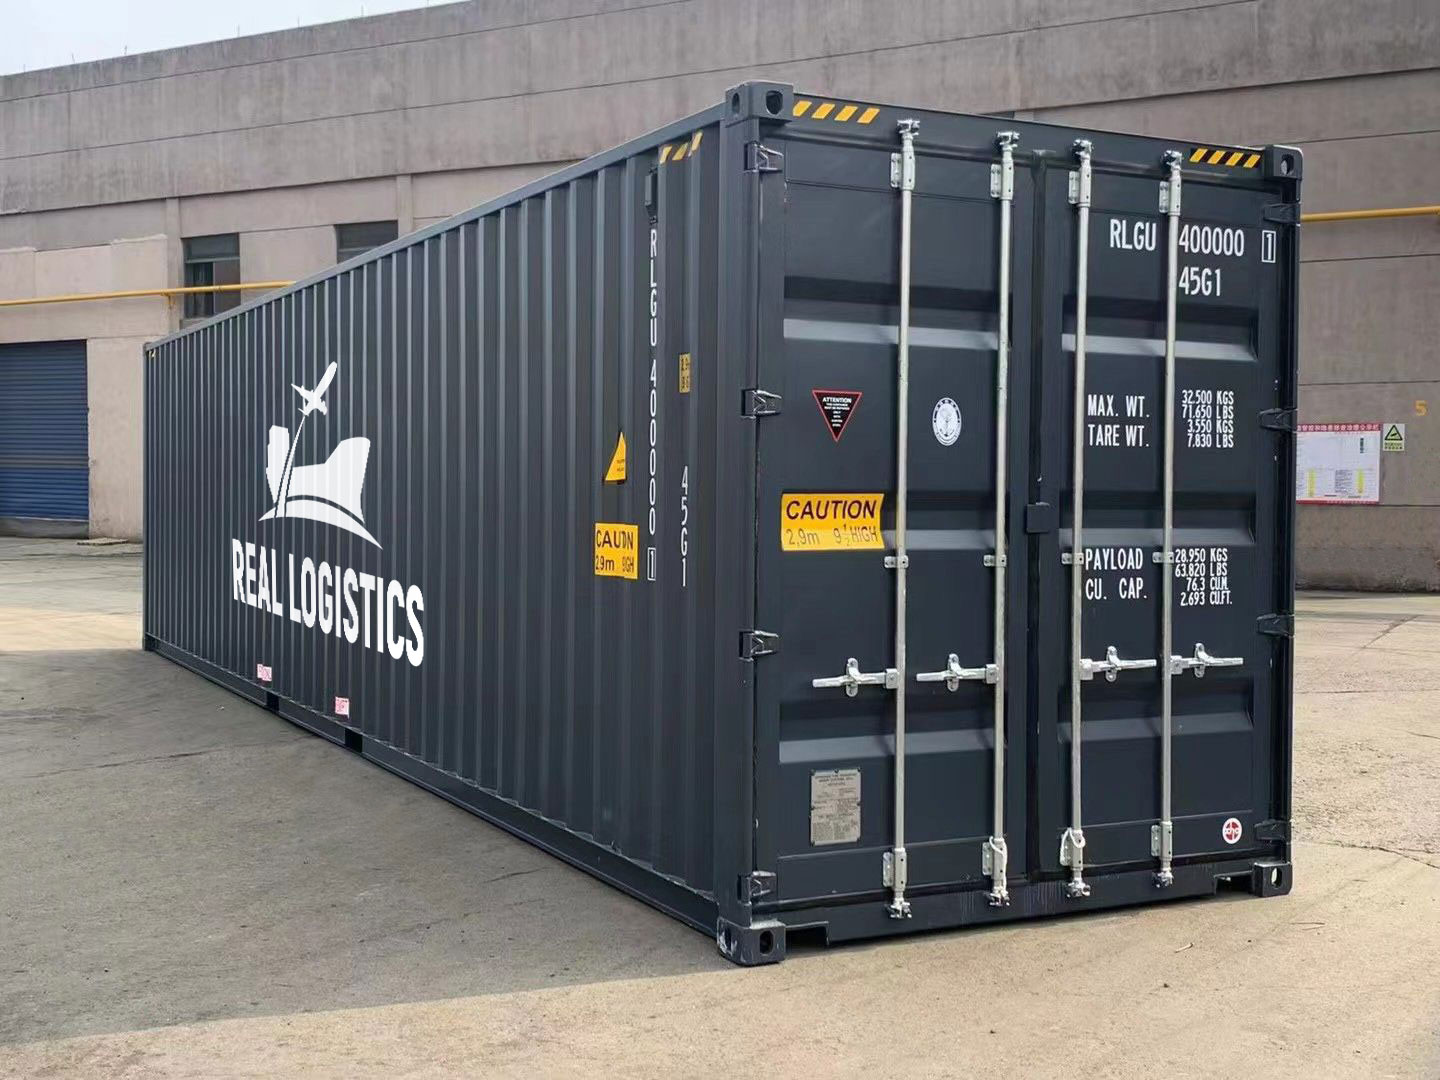 Real Logistics Containers